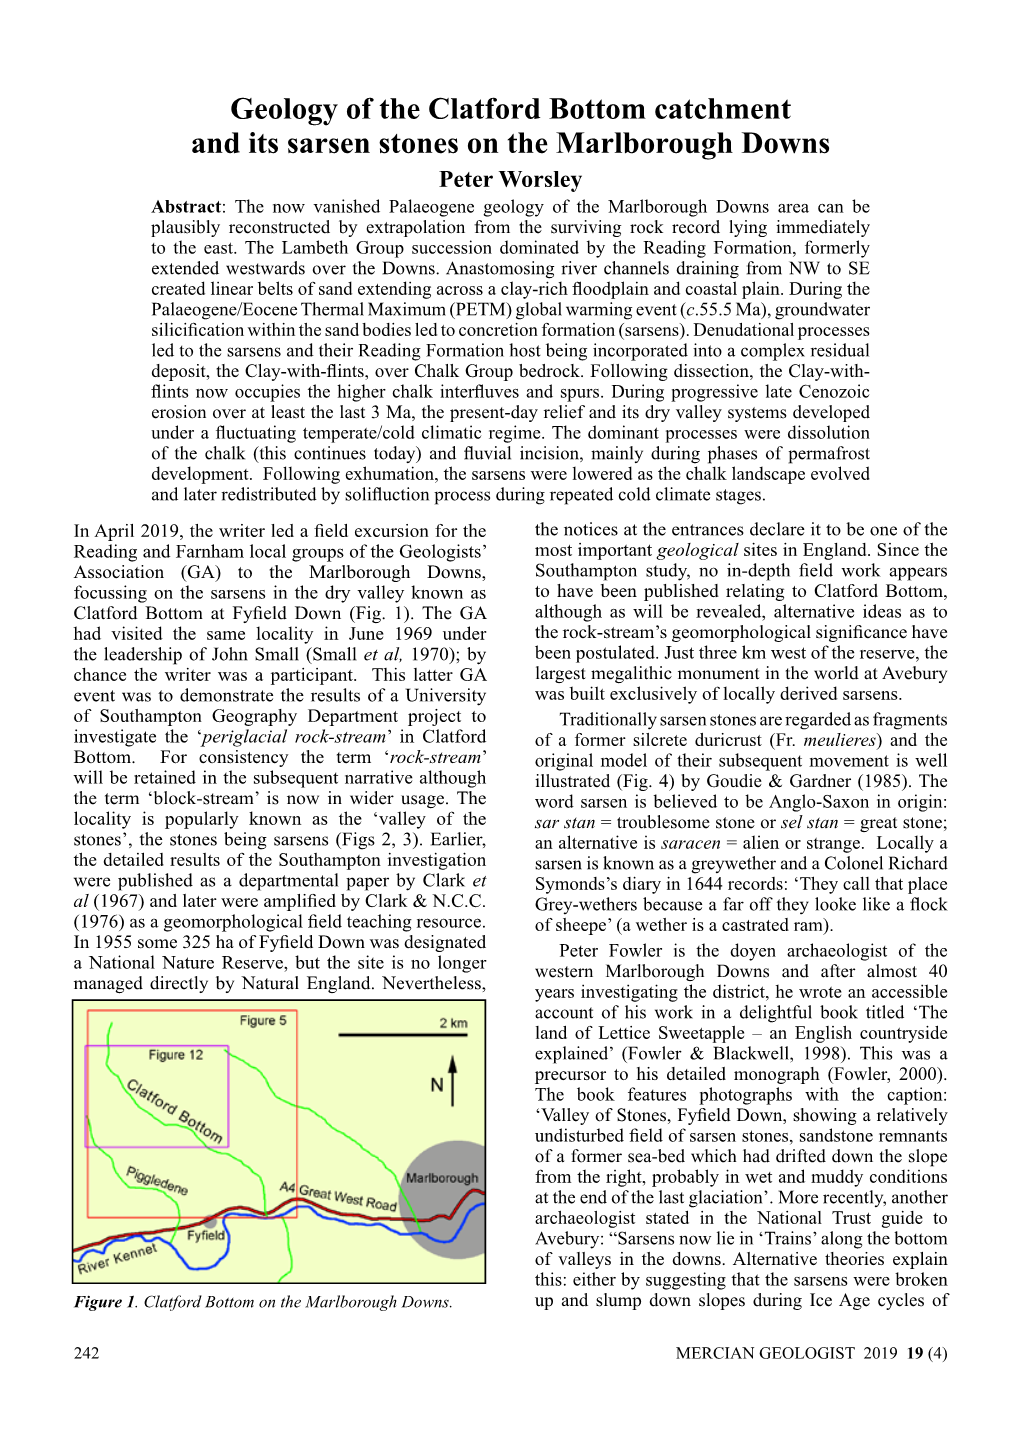 Geology of the Clatford Bottom Catchment and Its Sarsen Stones On